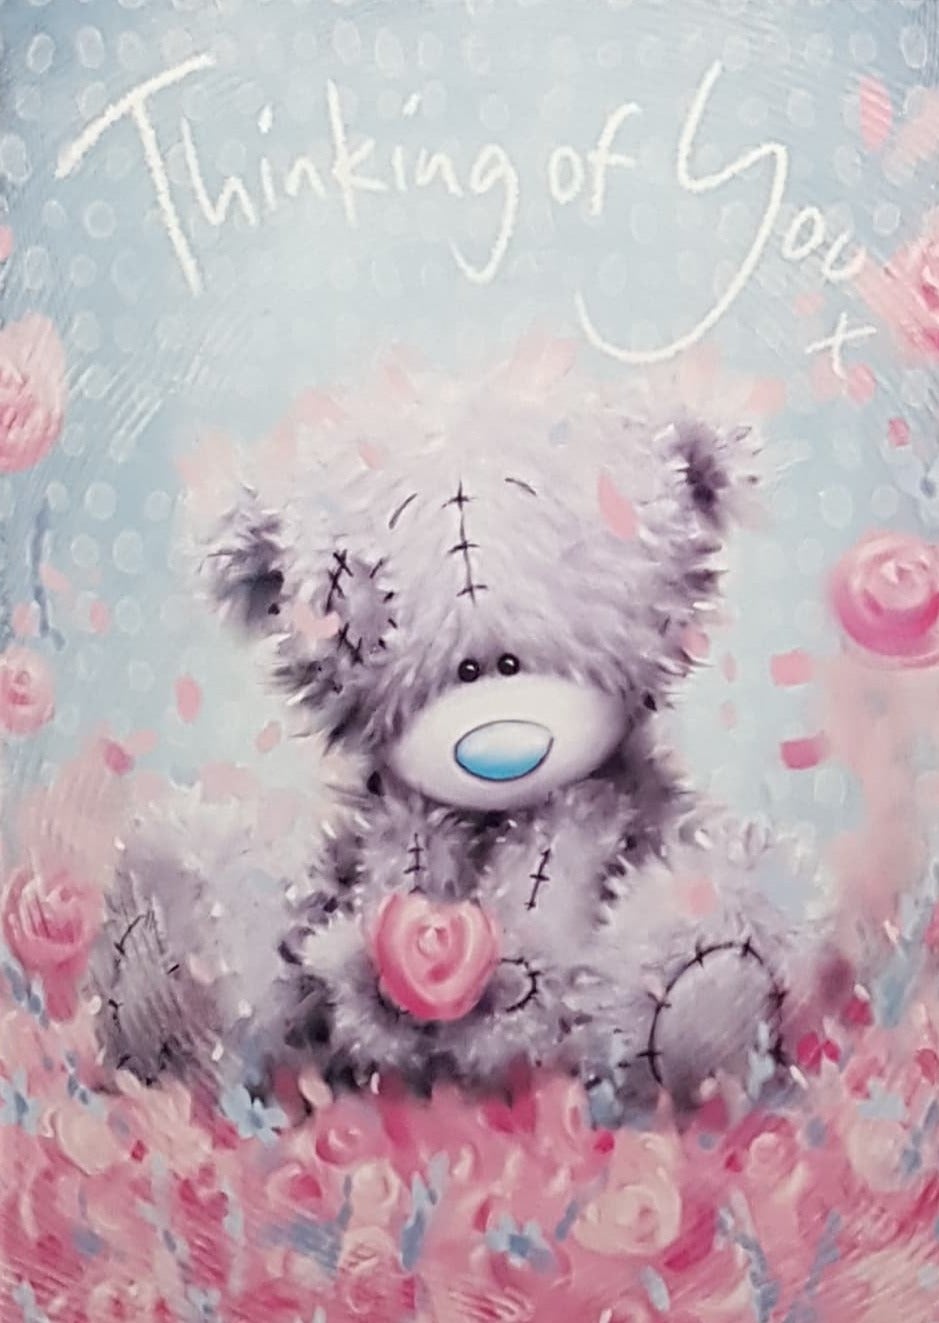 Thinking Of You Card - A Big Teddy & A Pink Flower Motive